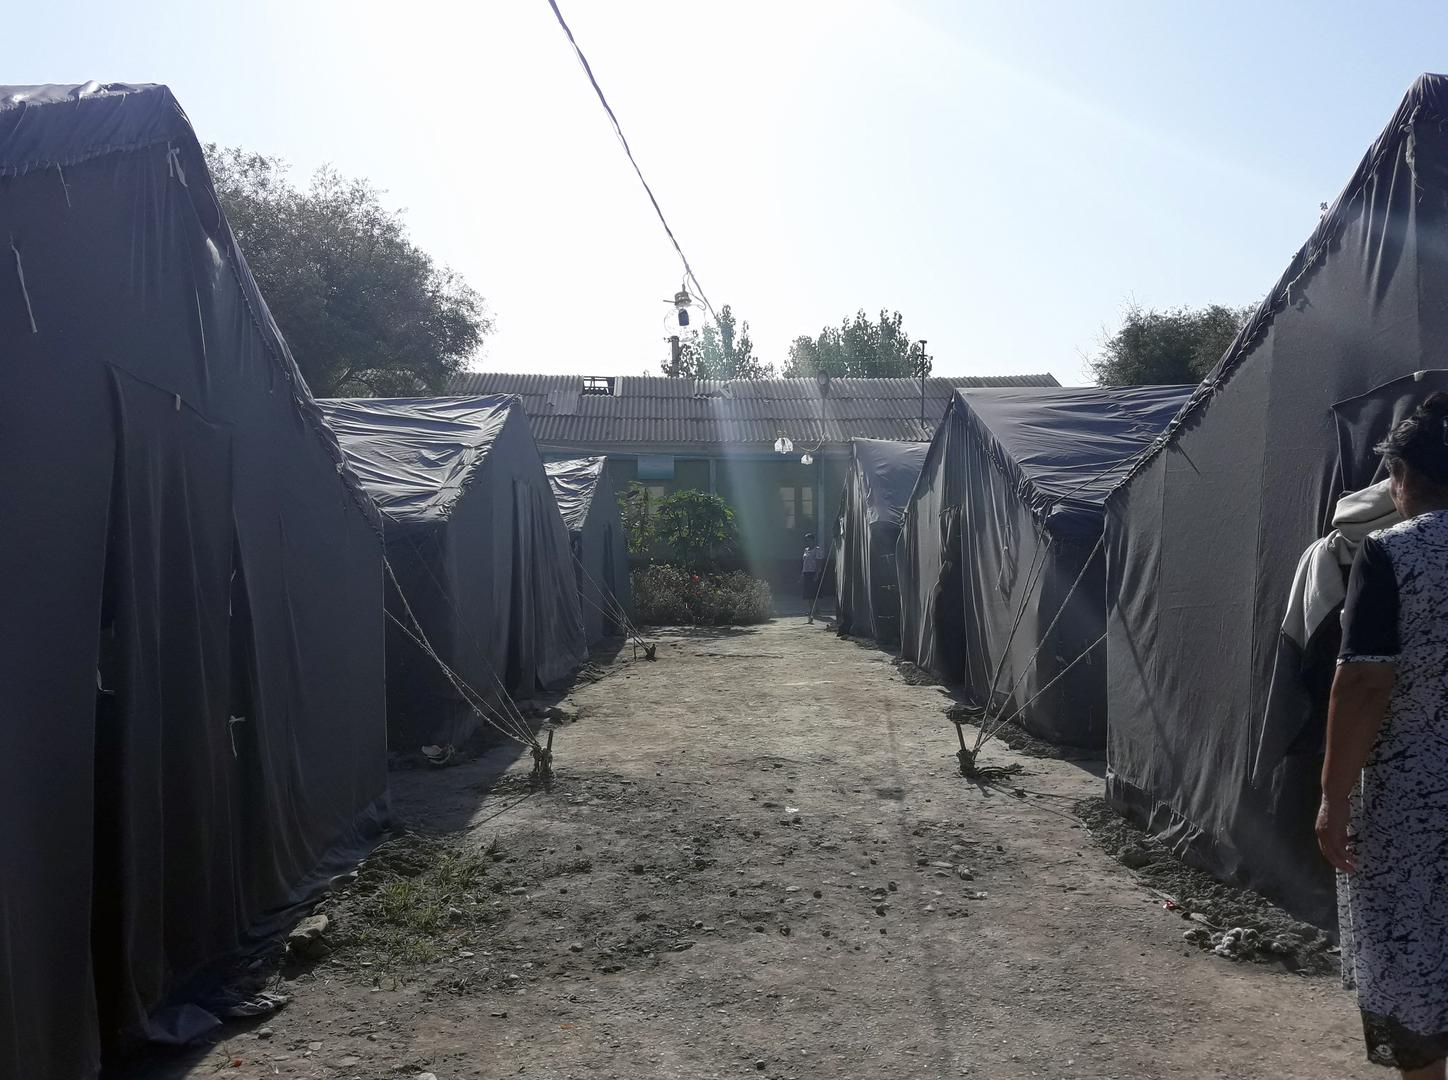 Housing provided for people working in the cotton fields during the 2016 harvest. Workers stay overnight for between a few weeks and two months, depending on their employers’ directions. Their employers are acting on orders from the government.